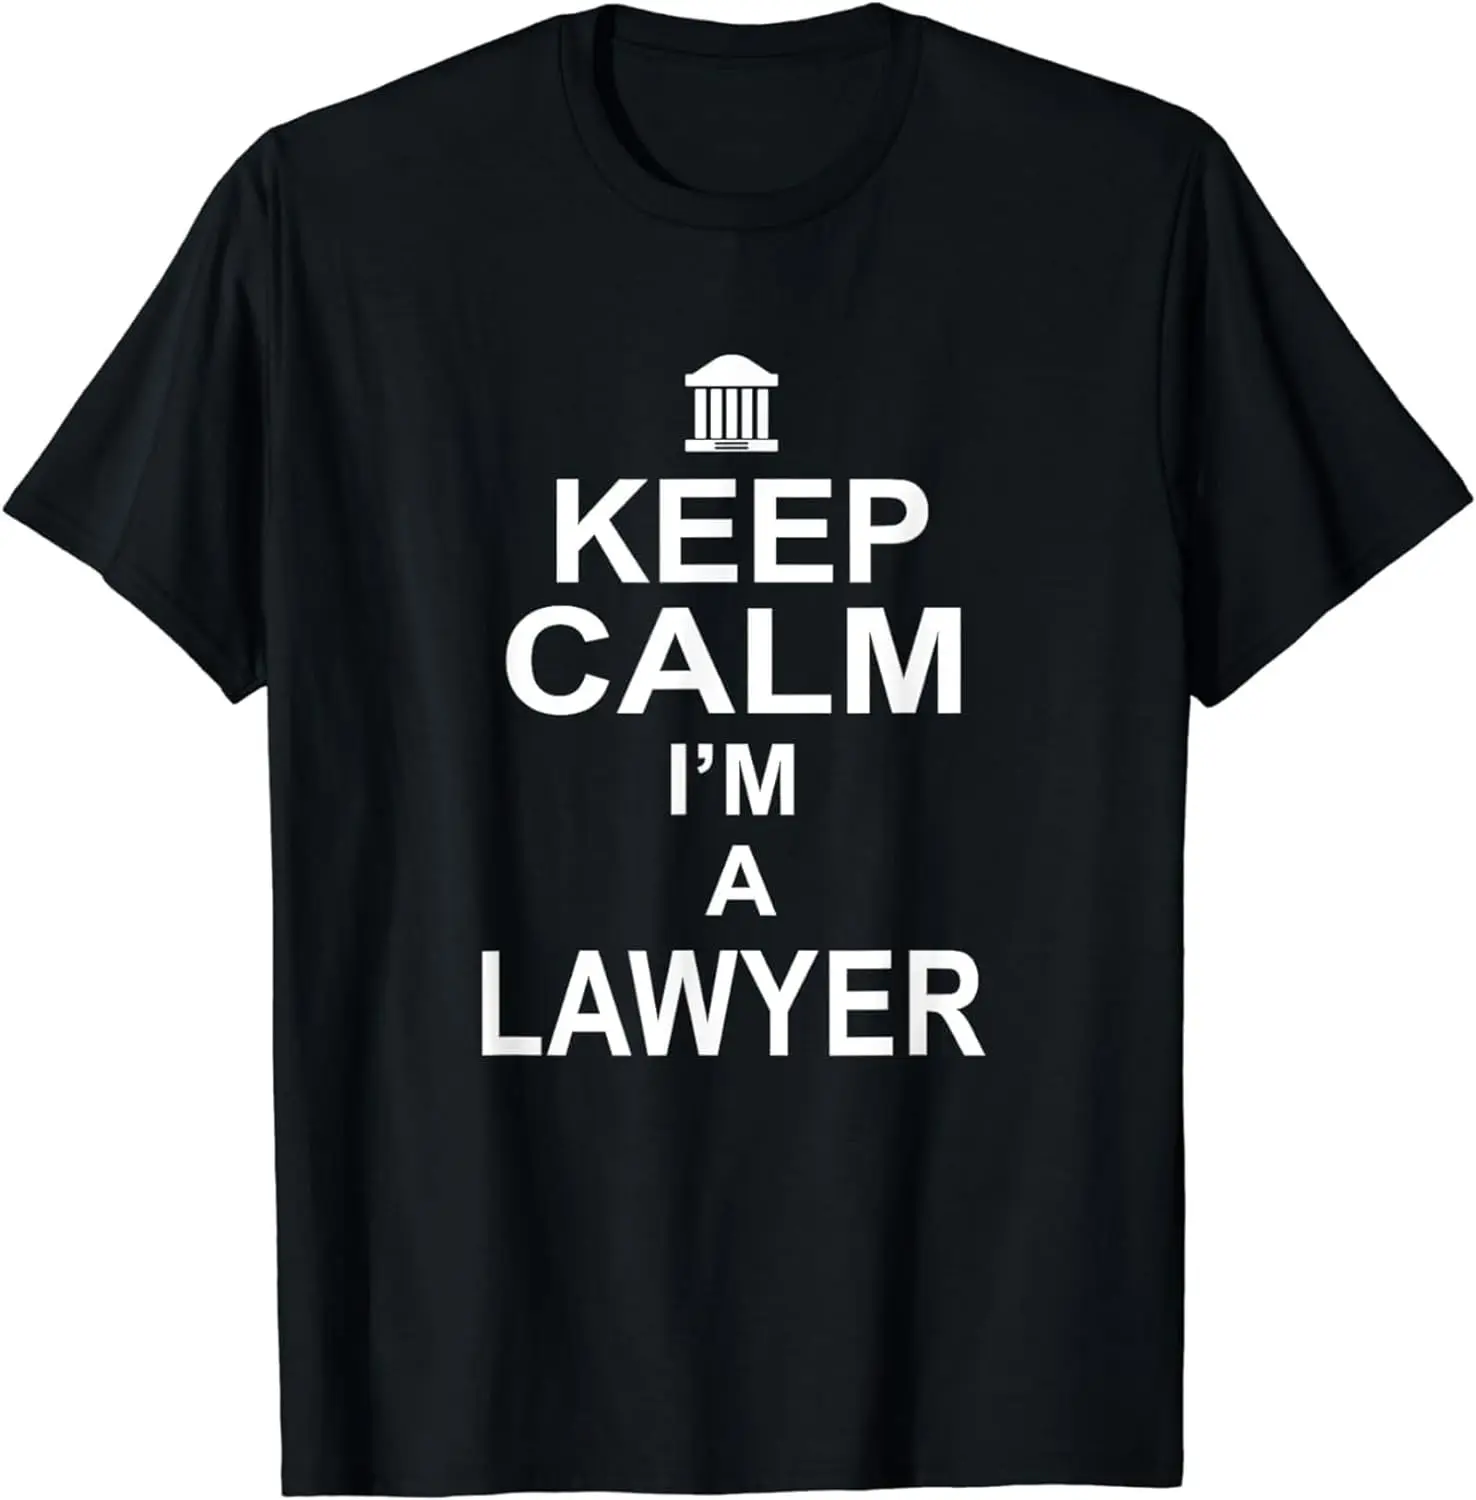 

Keep Calm I'm A Lawyer Graphic T Shirts, Women's Crew Neck Casual Premium Polyester Breathable Tee